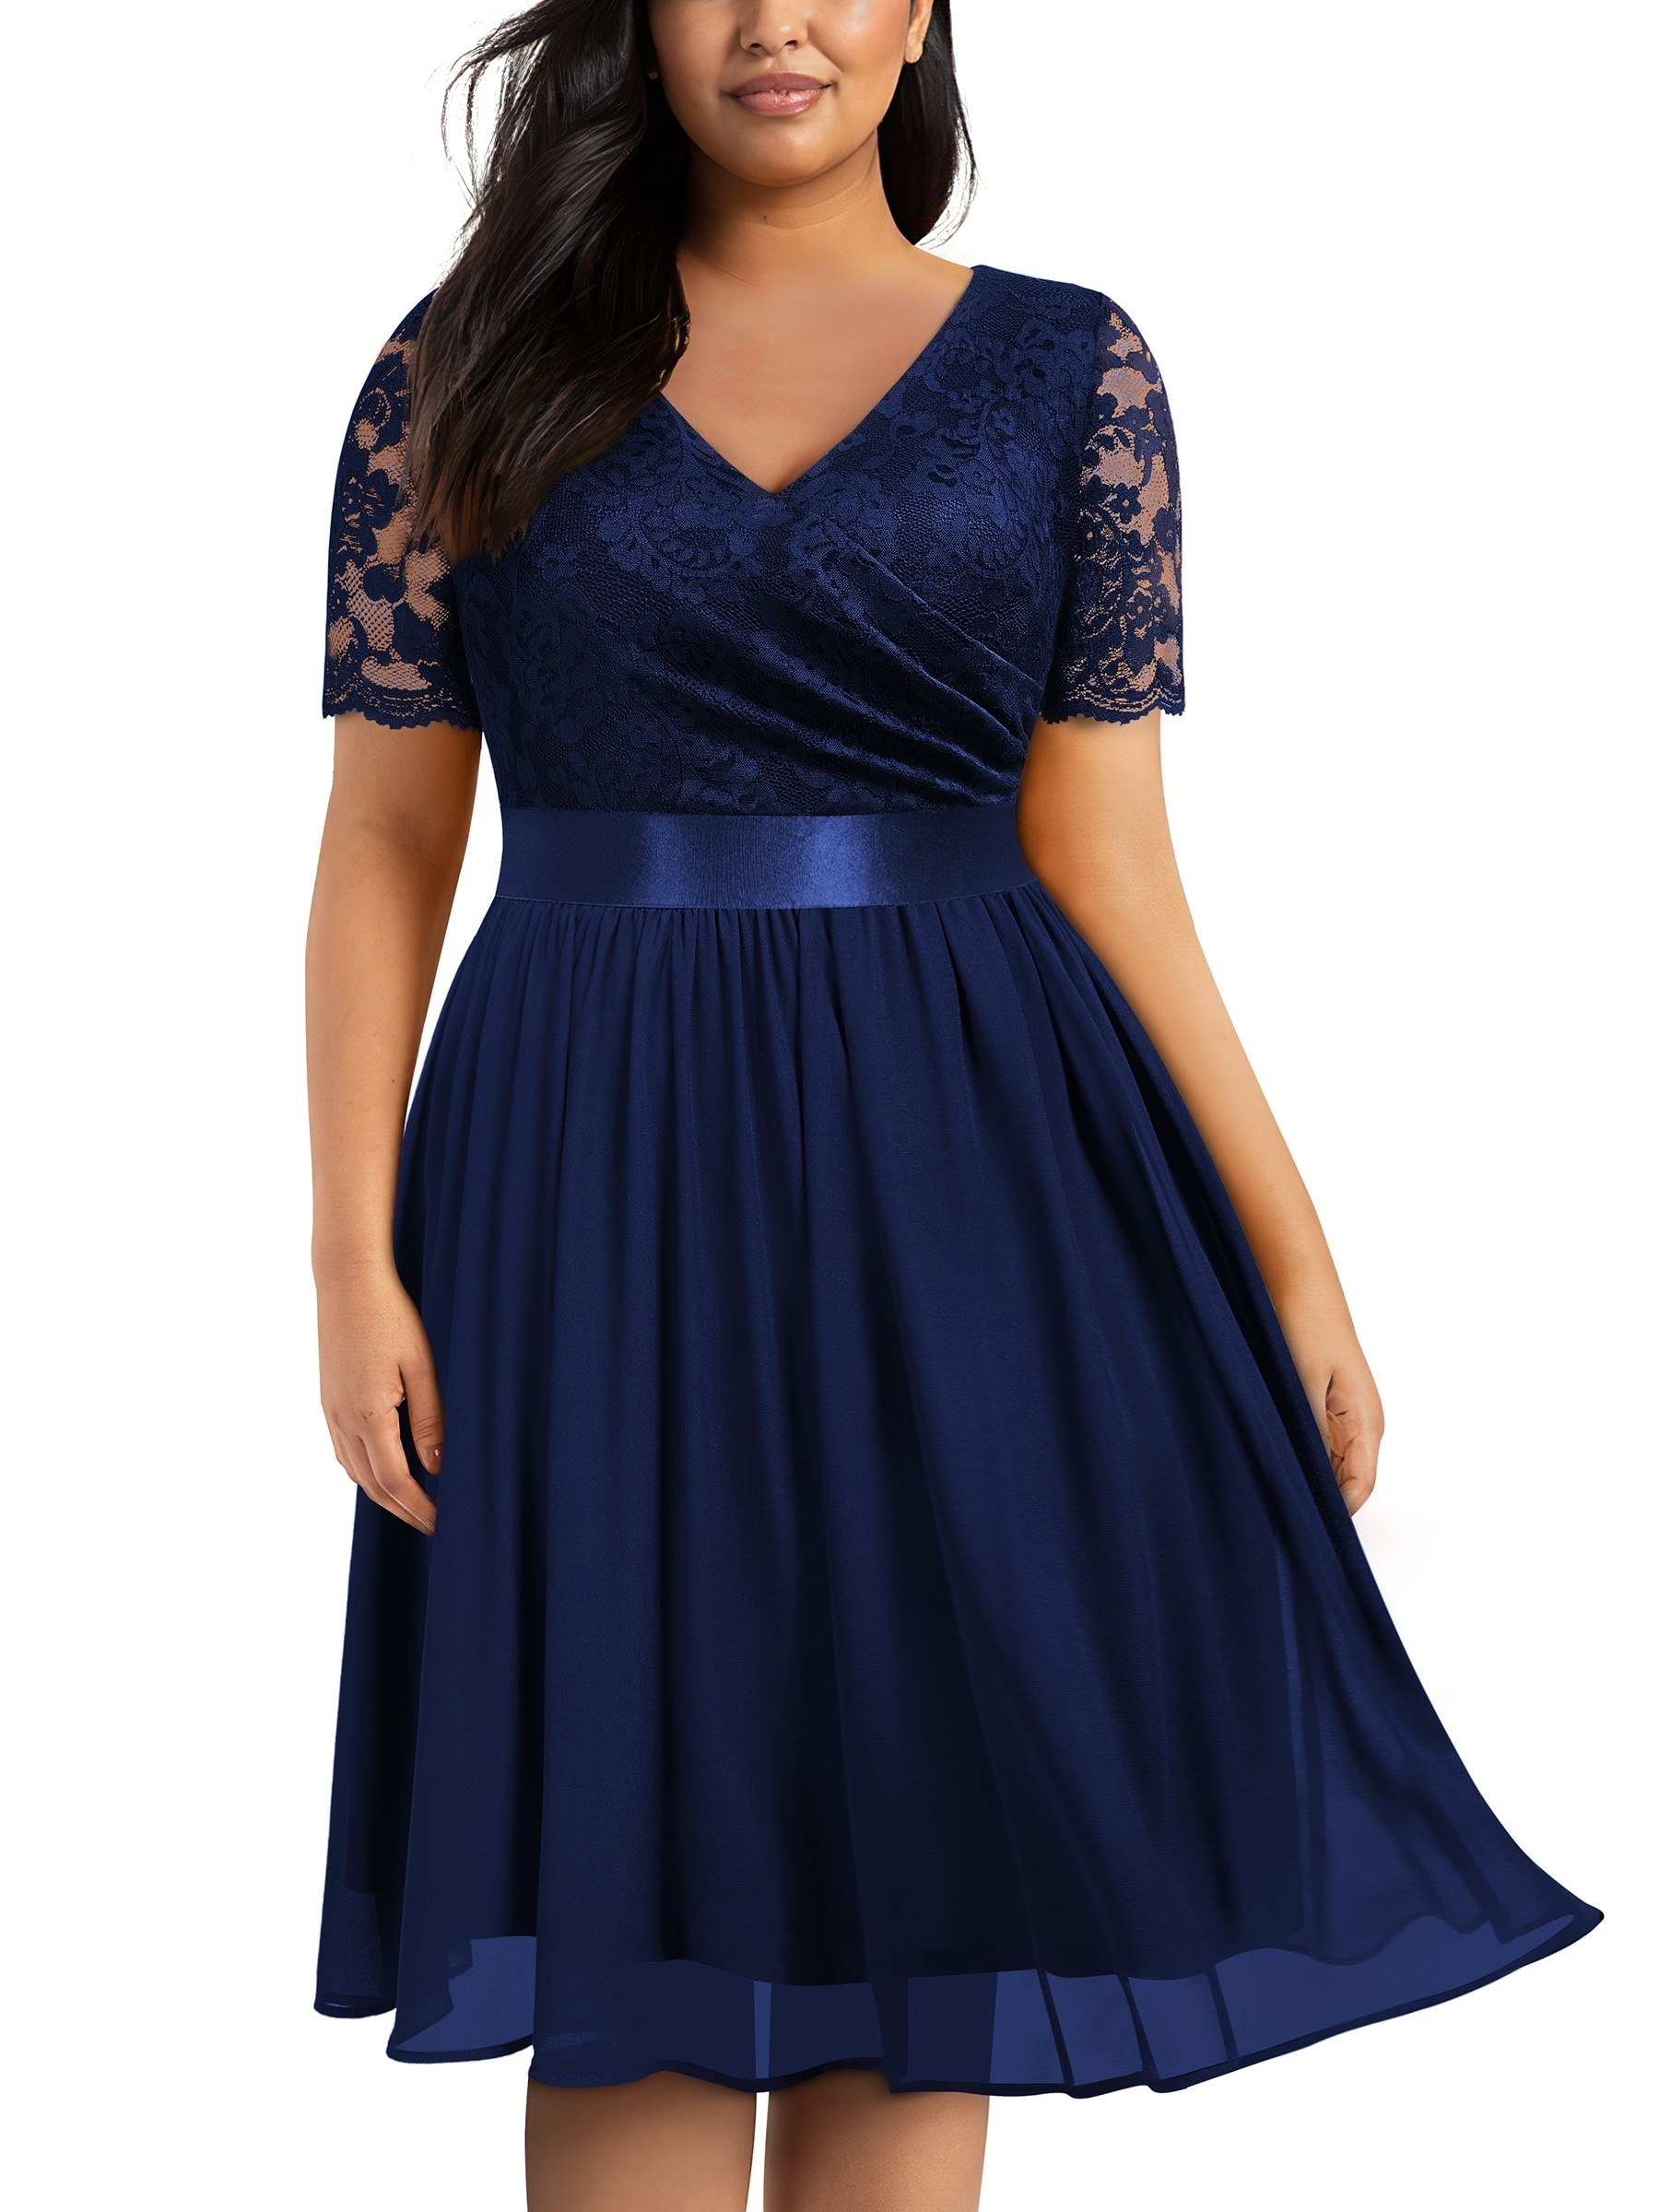 CURVE PARTY DRESSES AND TOPS  Fashion CURVE PARTY DRESSES AND